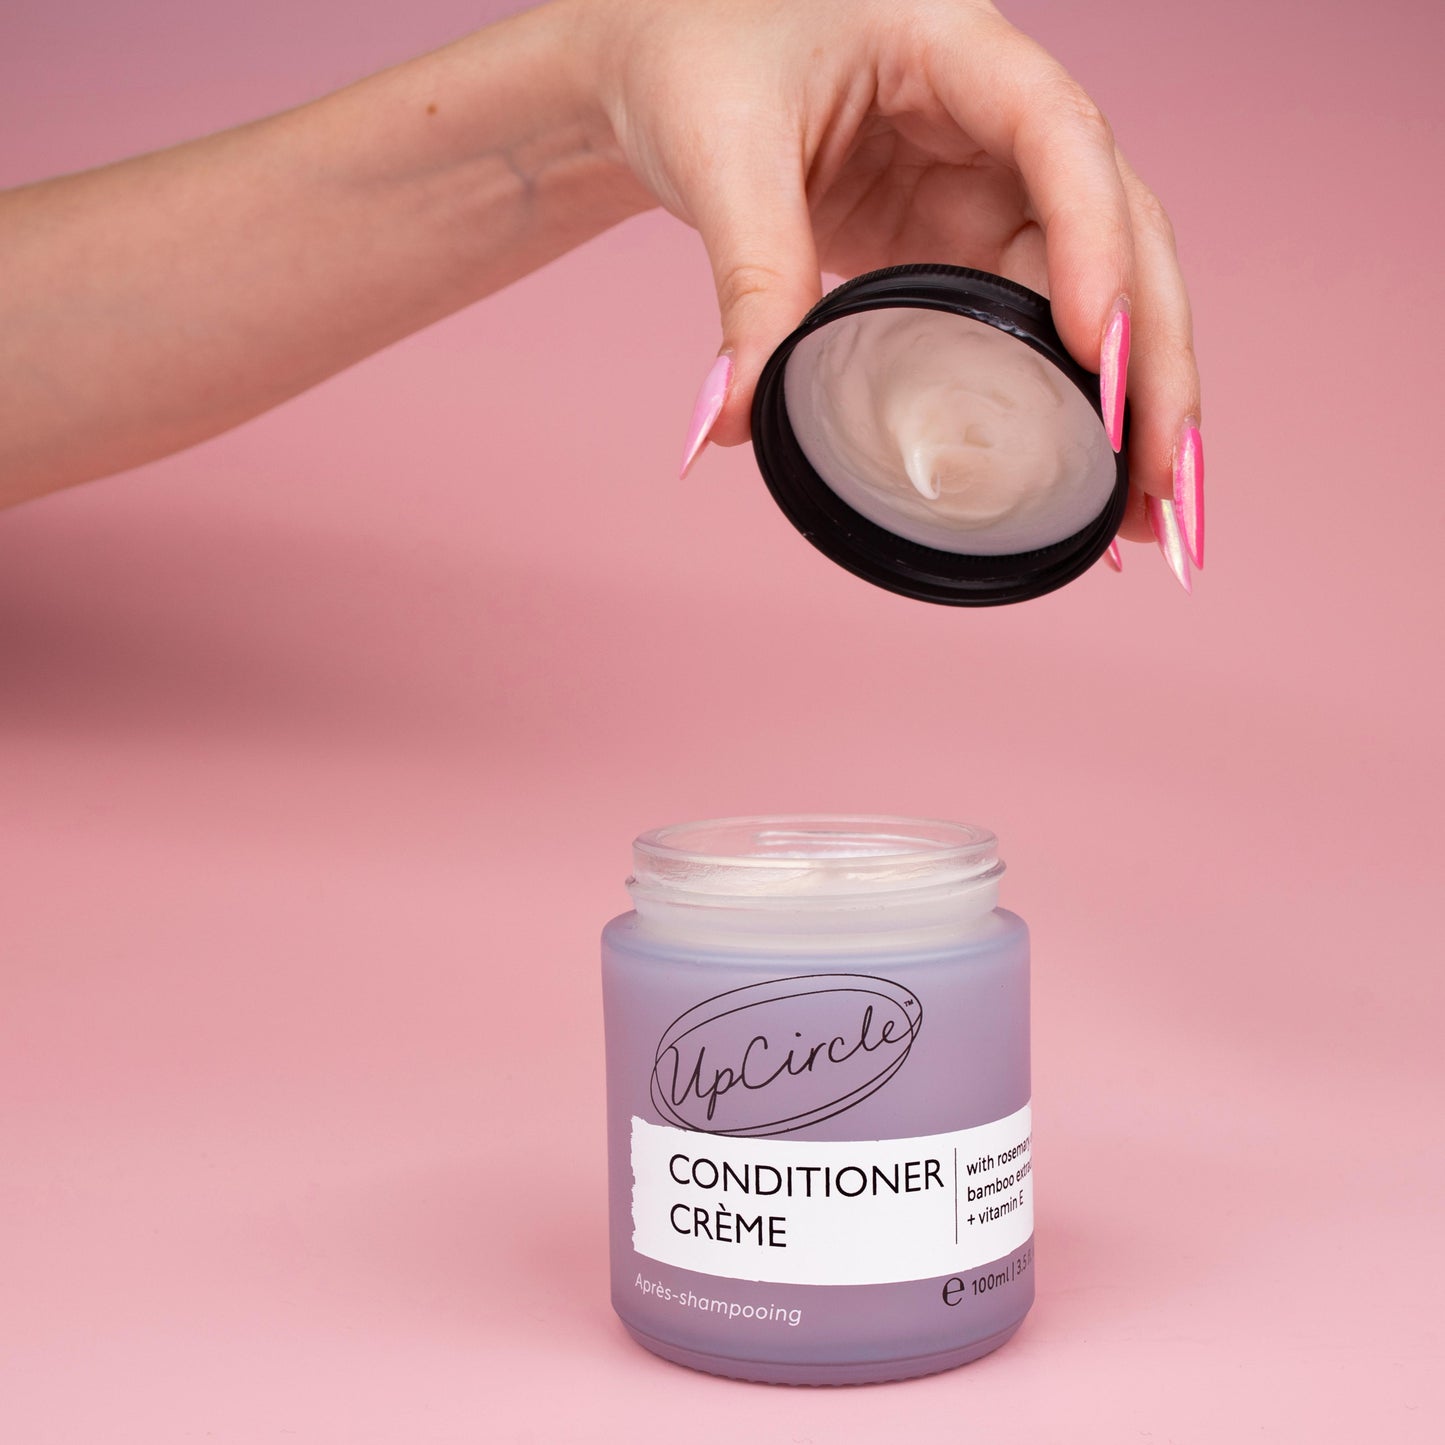 lifestyle photo of upcircle's conditioner cream on a pink background. the conditioner is in a blue/lilac frosted glass jar with black aluminium lid. The jar is open and you can see the creamy texture of the conditioner inside. The lid being lifted off the jar by a woman's hand with multi tonal pink finger nails